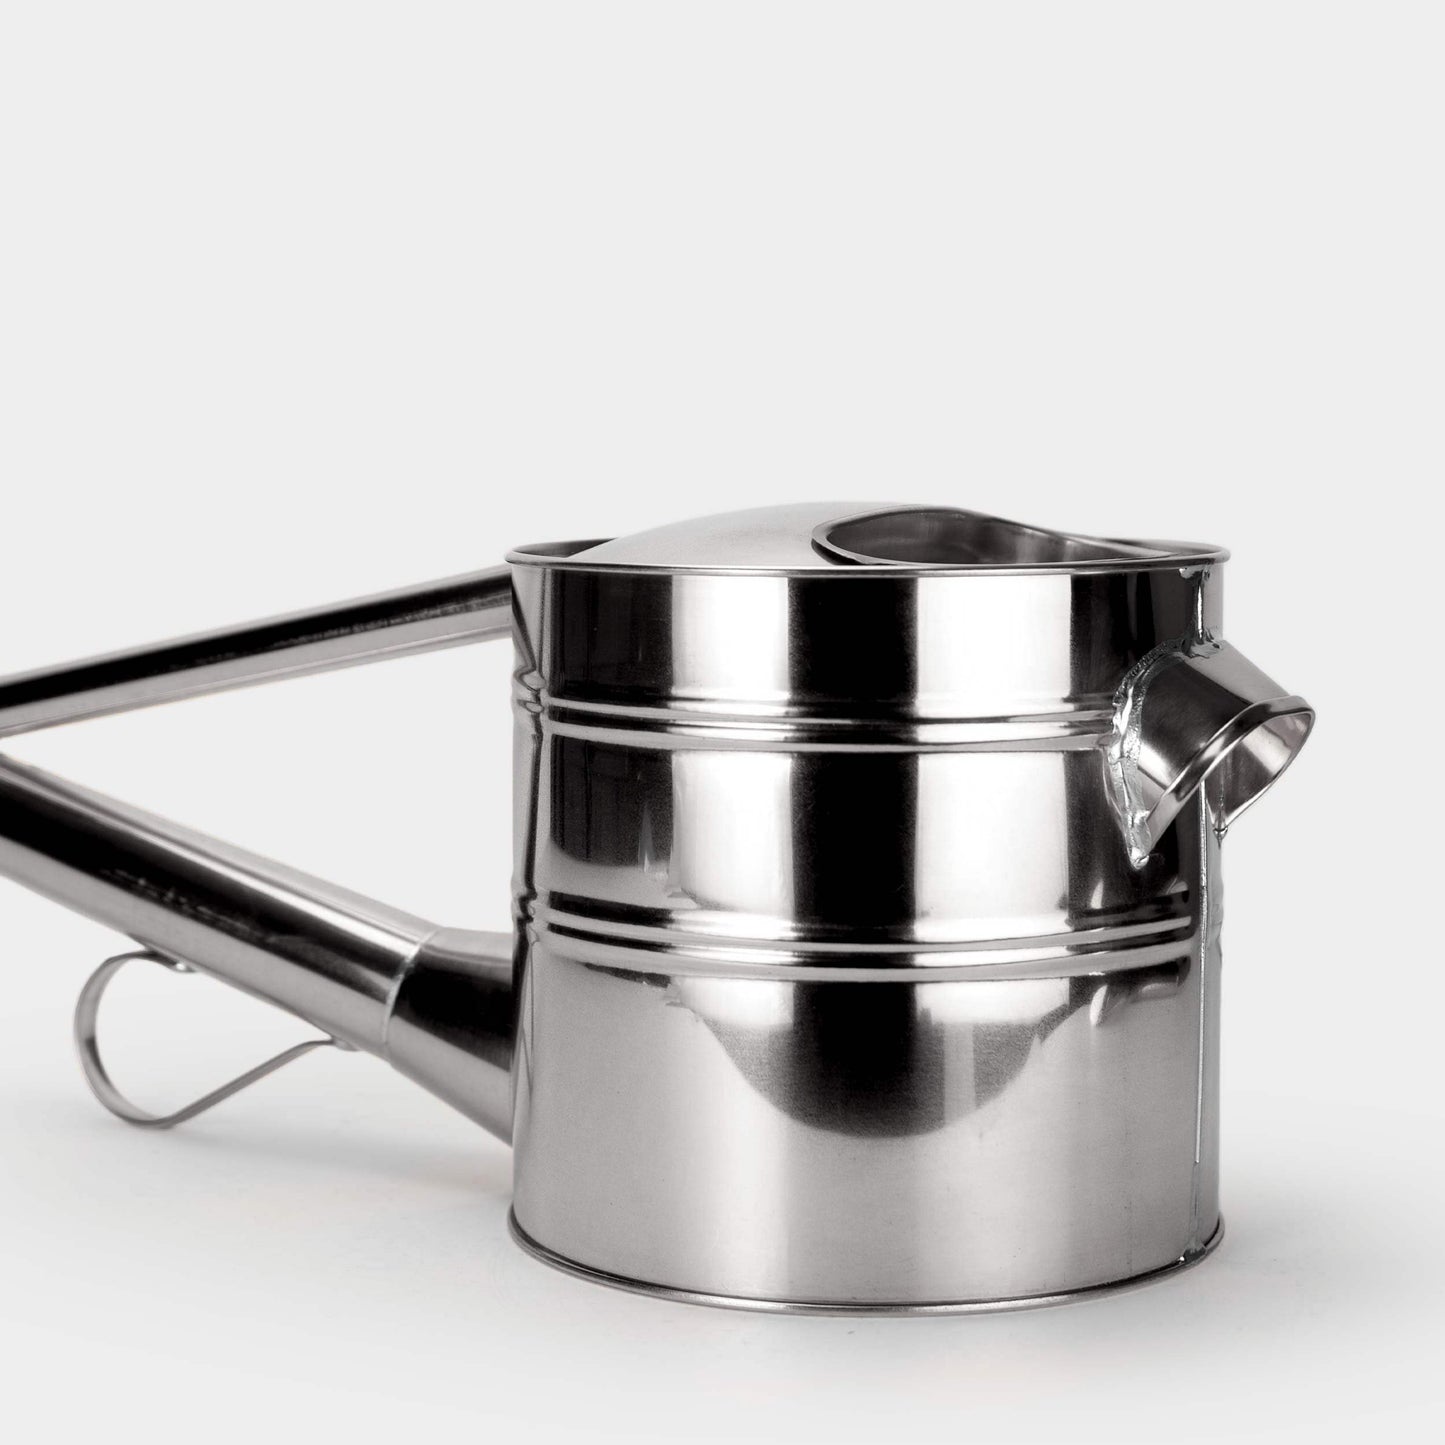 LONG-NECKED STAINLESS STEEL WATERING CAN NO. 6 BY NEGISHI INDUSTRY CO.